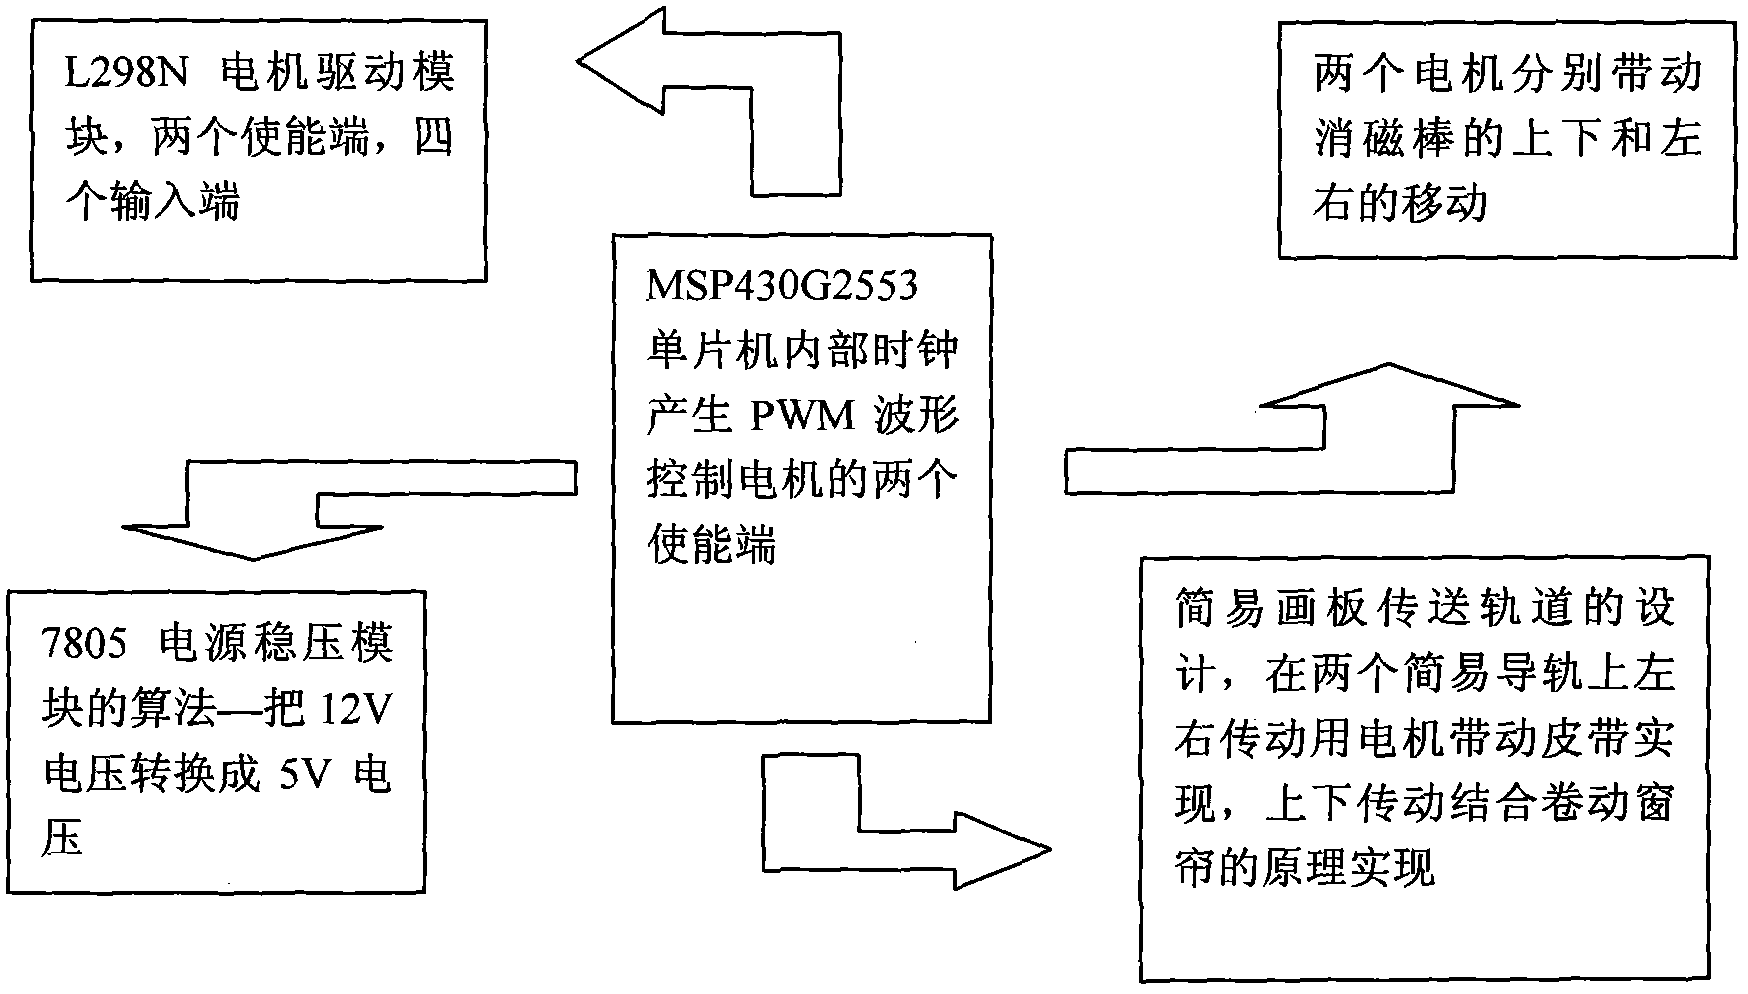 Blackboard device capable of automatically erasing characters